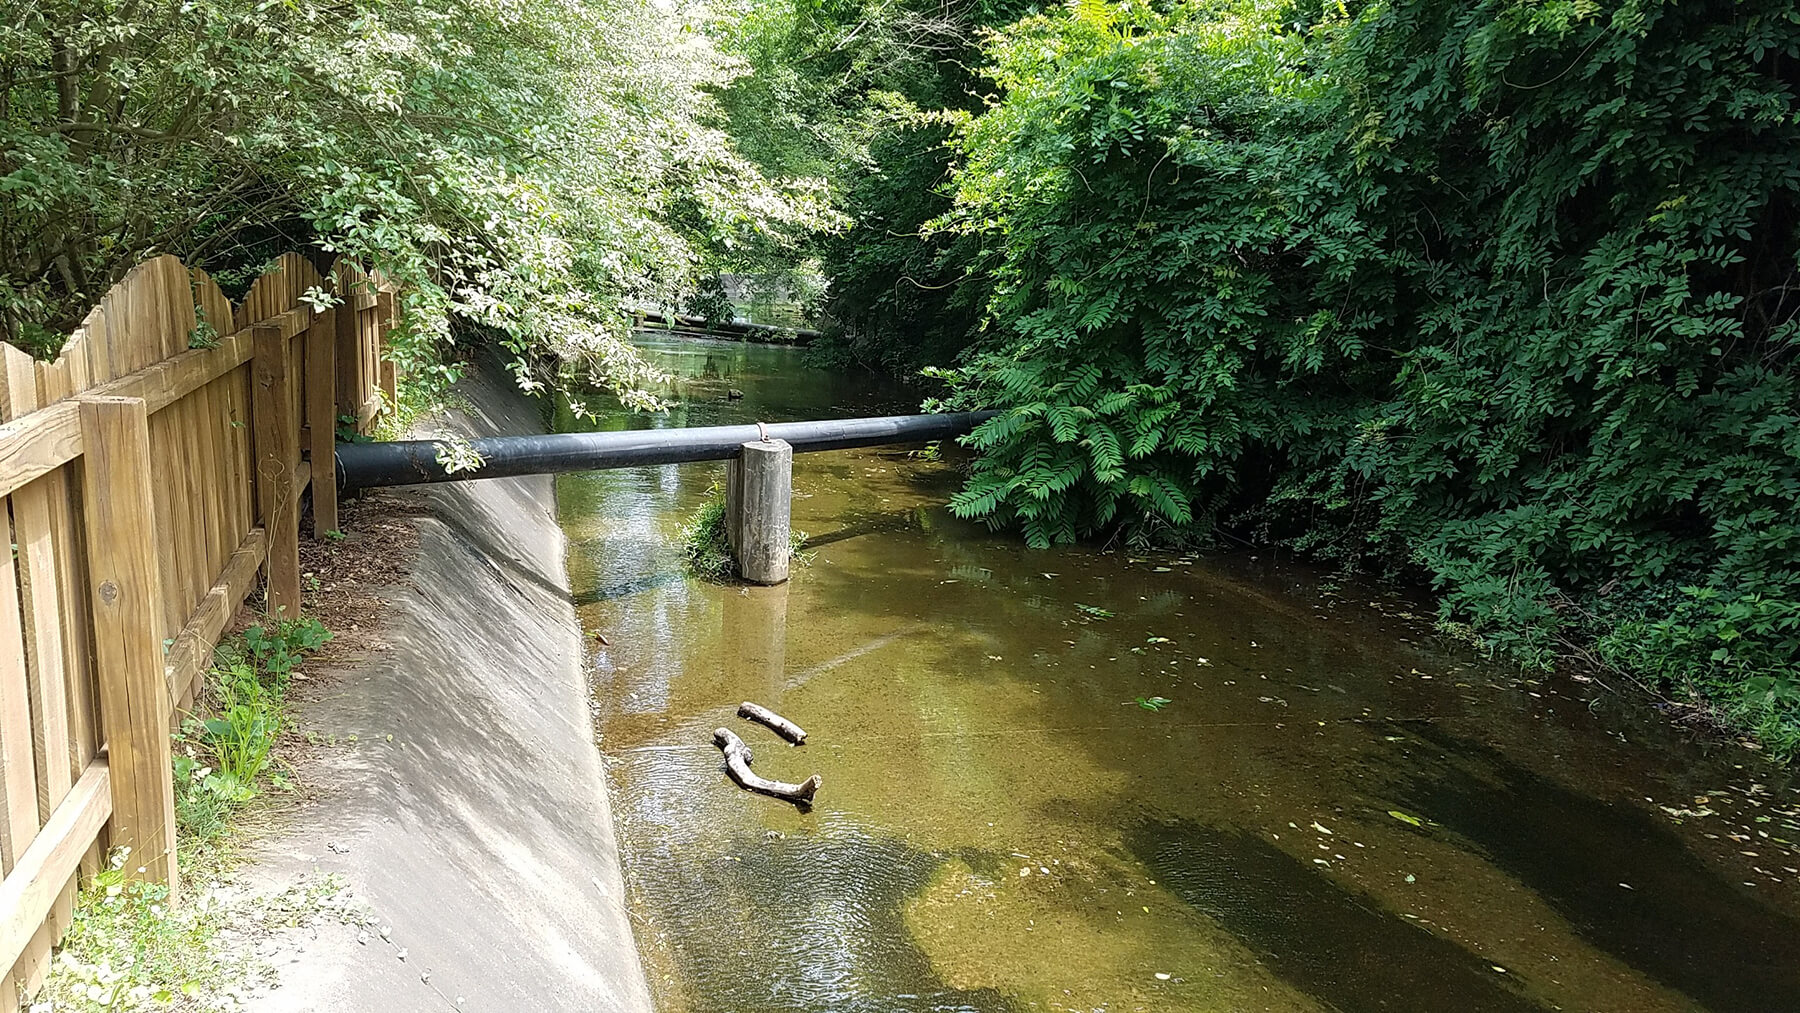 Pipe running across waterway surrounded by trees.